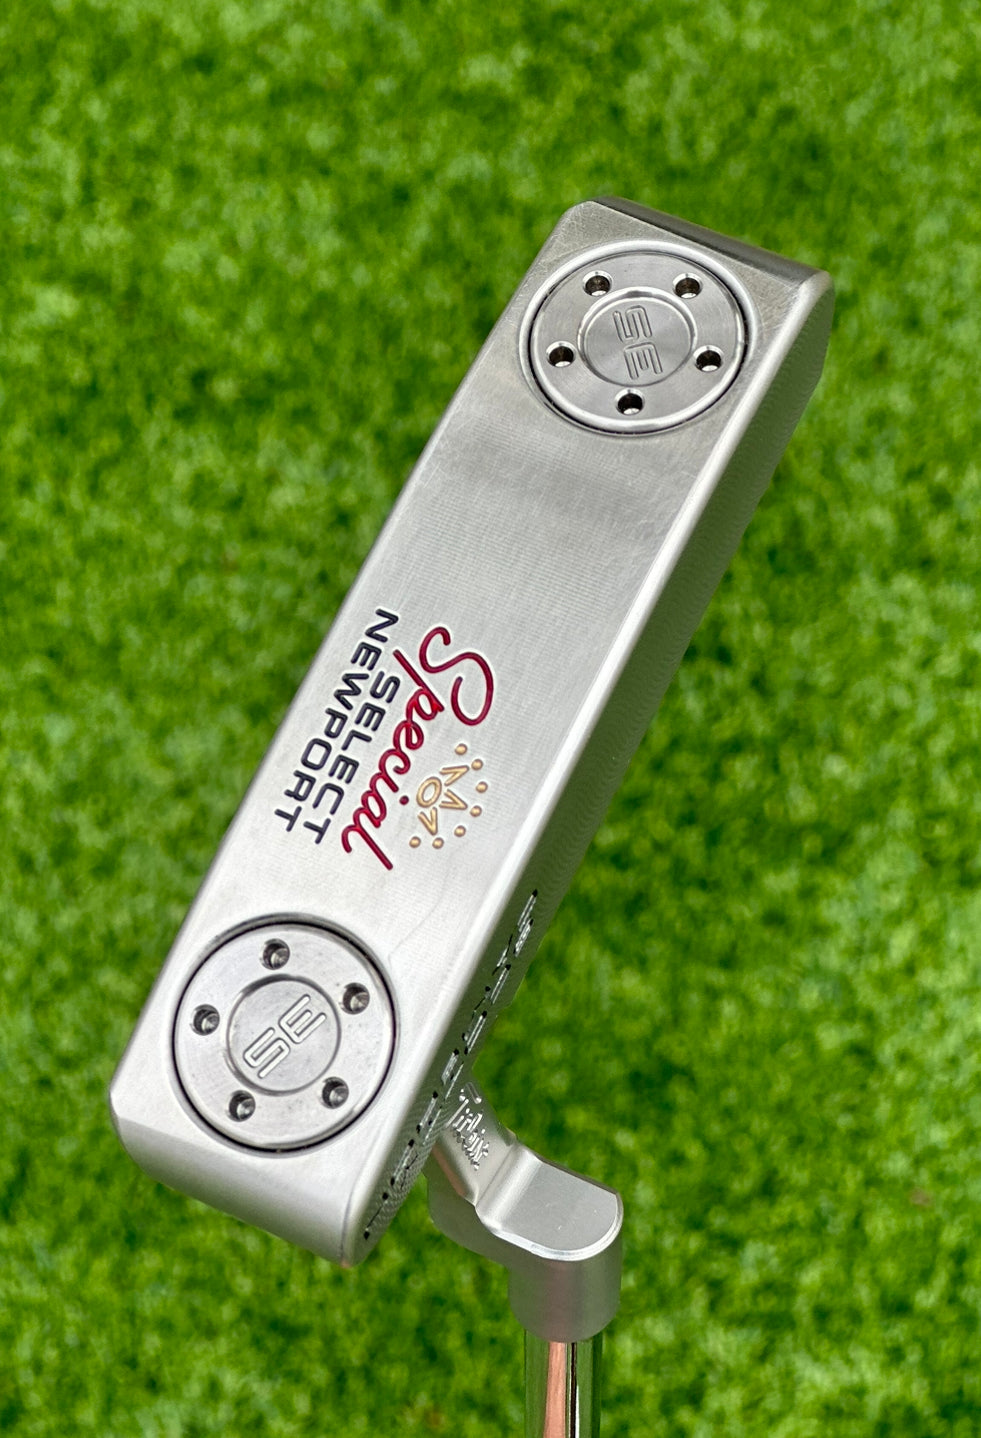 Scotty Cameron Special Select Newport SSS 34''